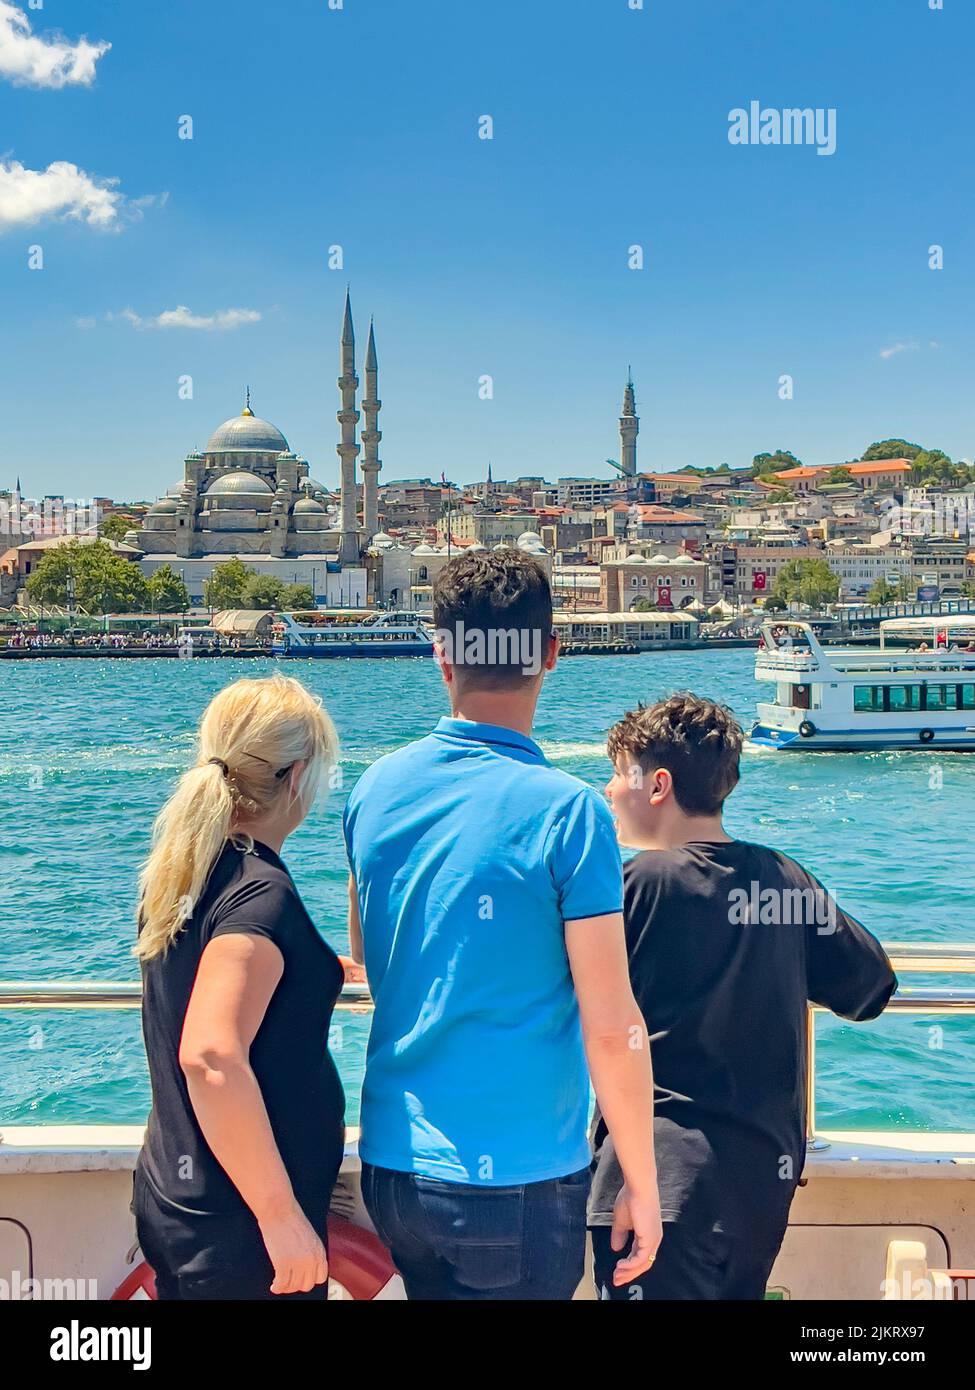 Istanbul, Turkey, 07.14.2022: Tourist family of father, mother and child on Istanbul background. Woman, man, boy, rear view, standing on ferry railing Stock Photo